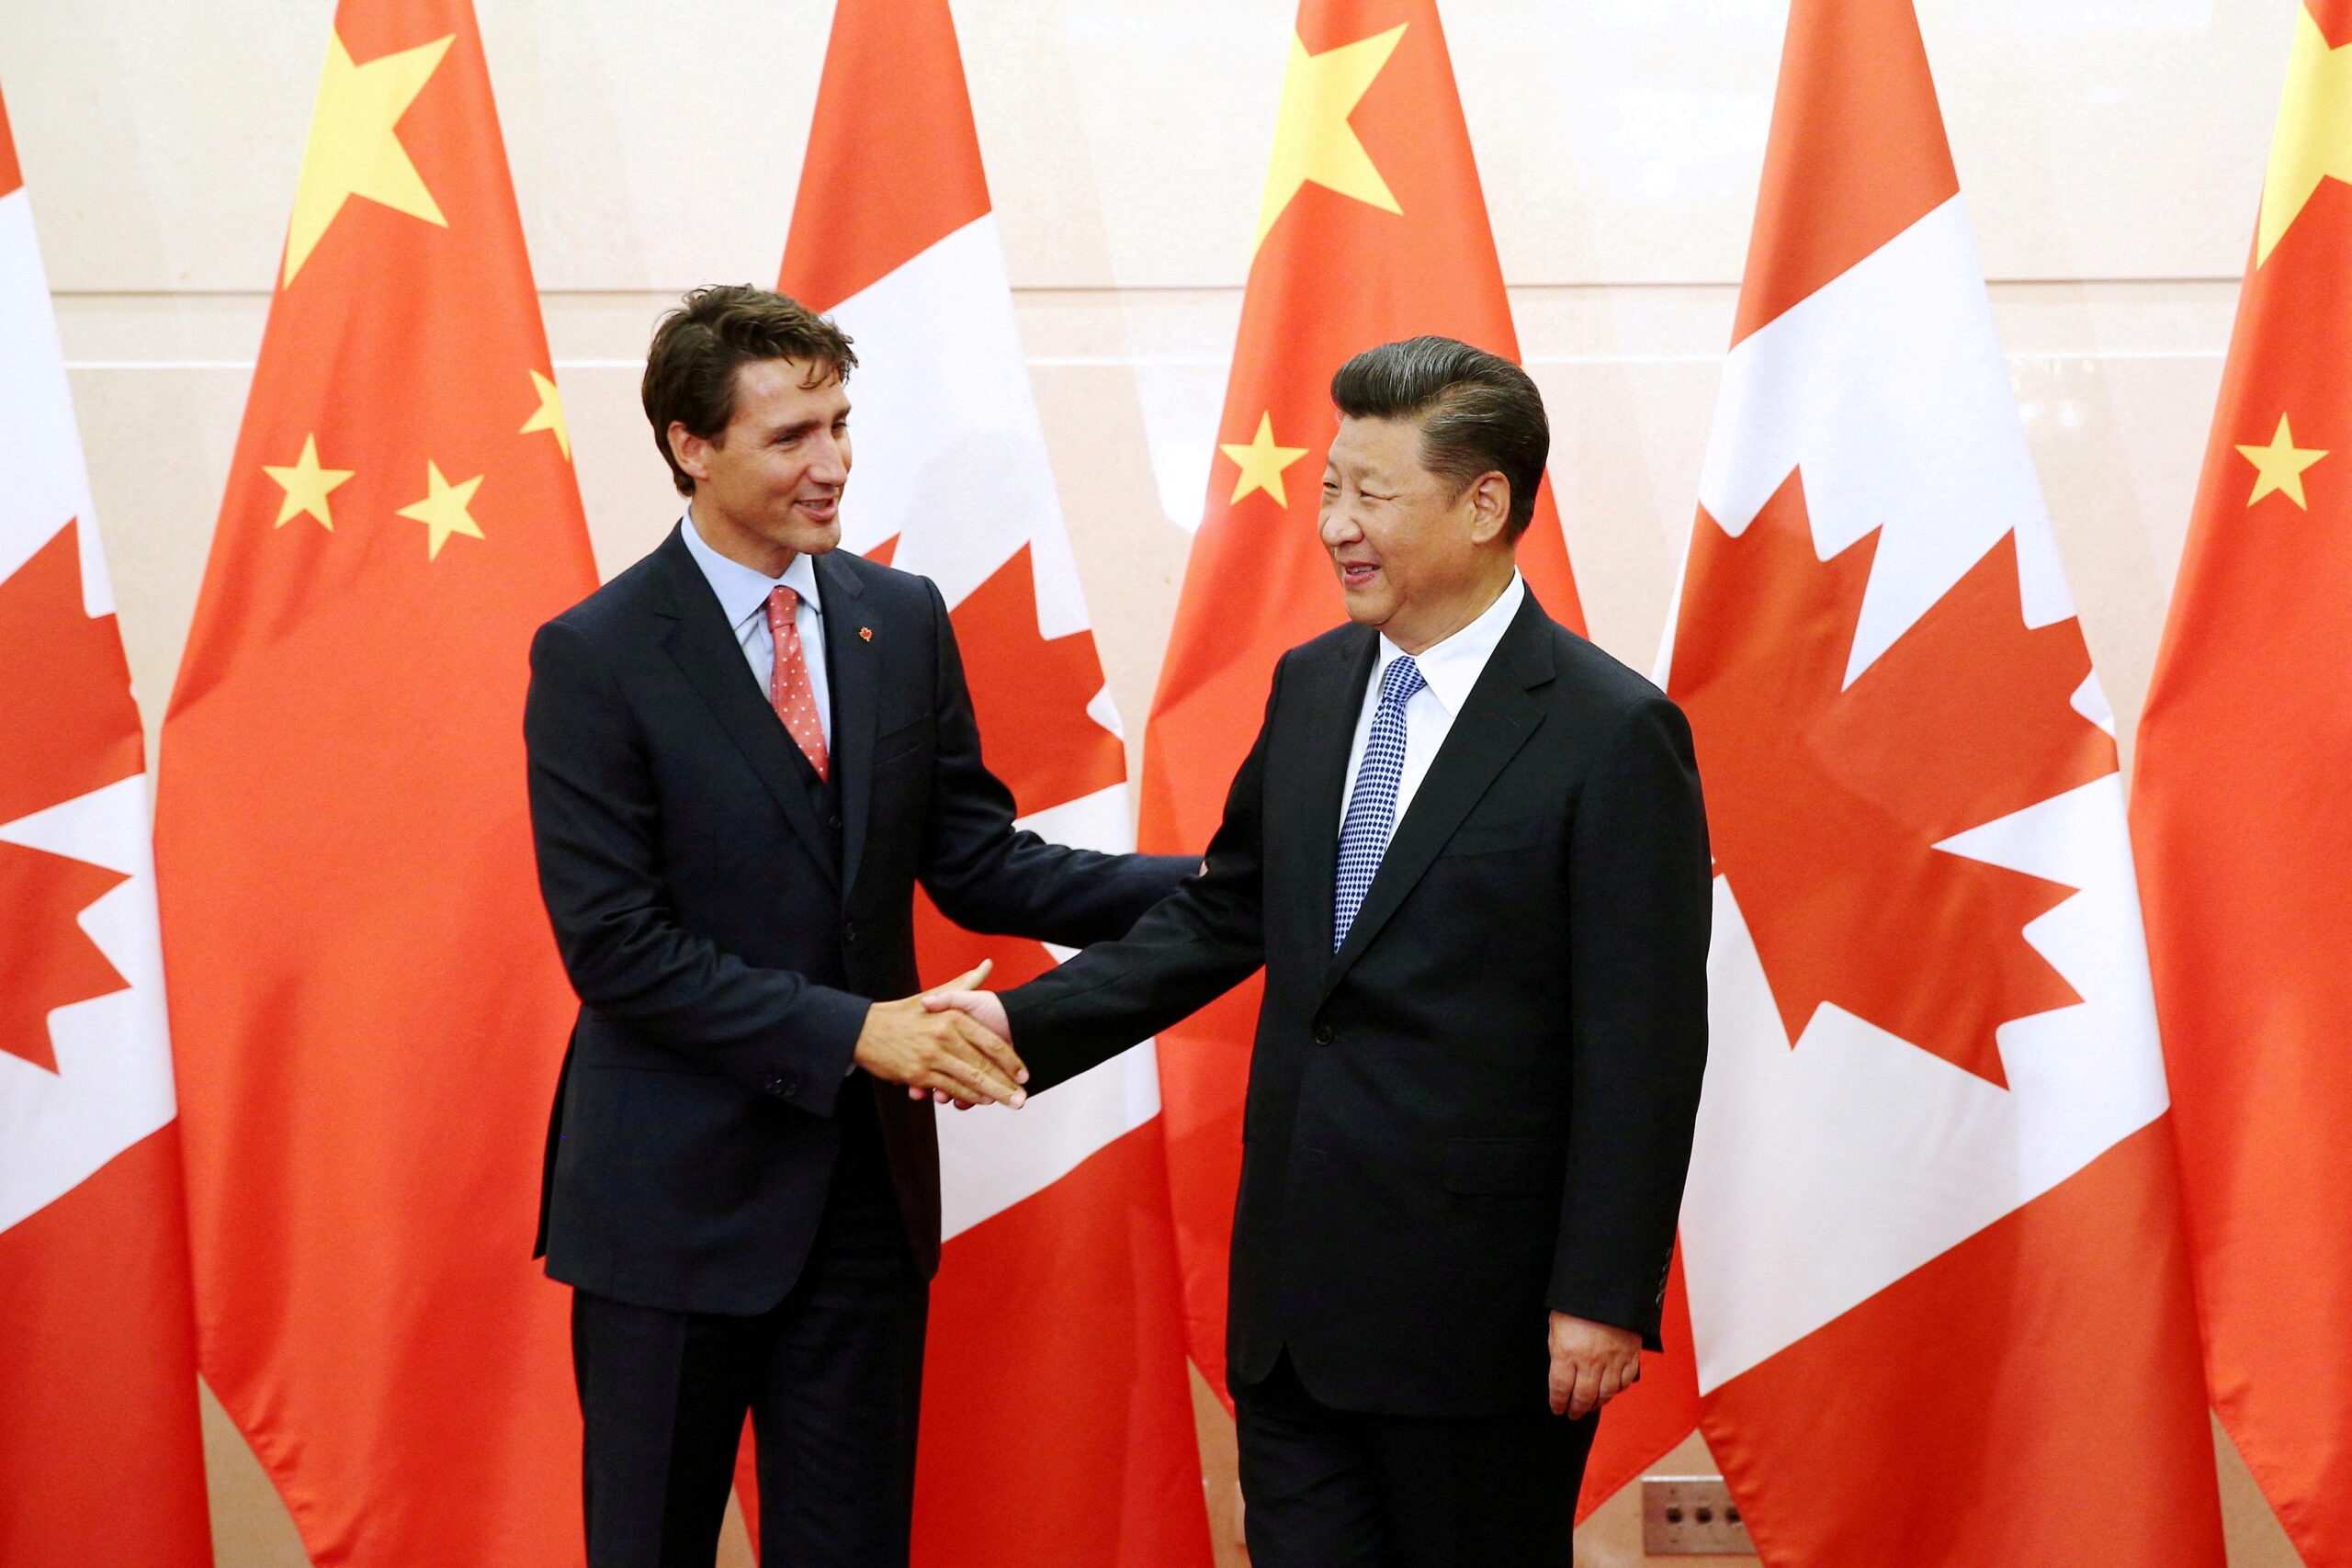 Western states need united front against divisive China – Trudeau